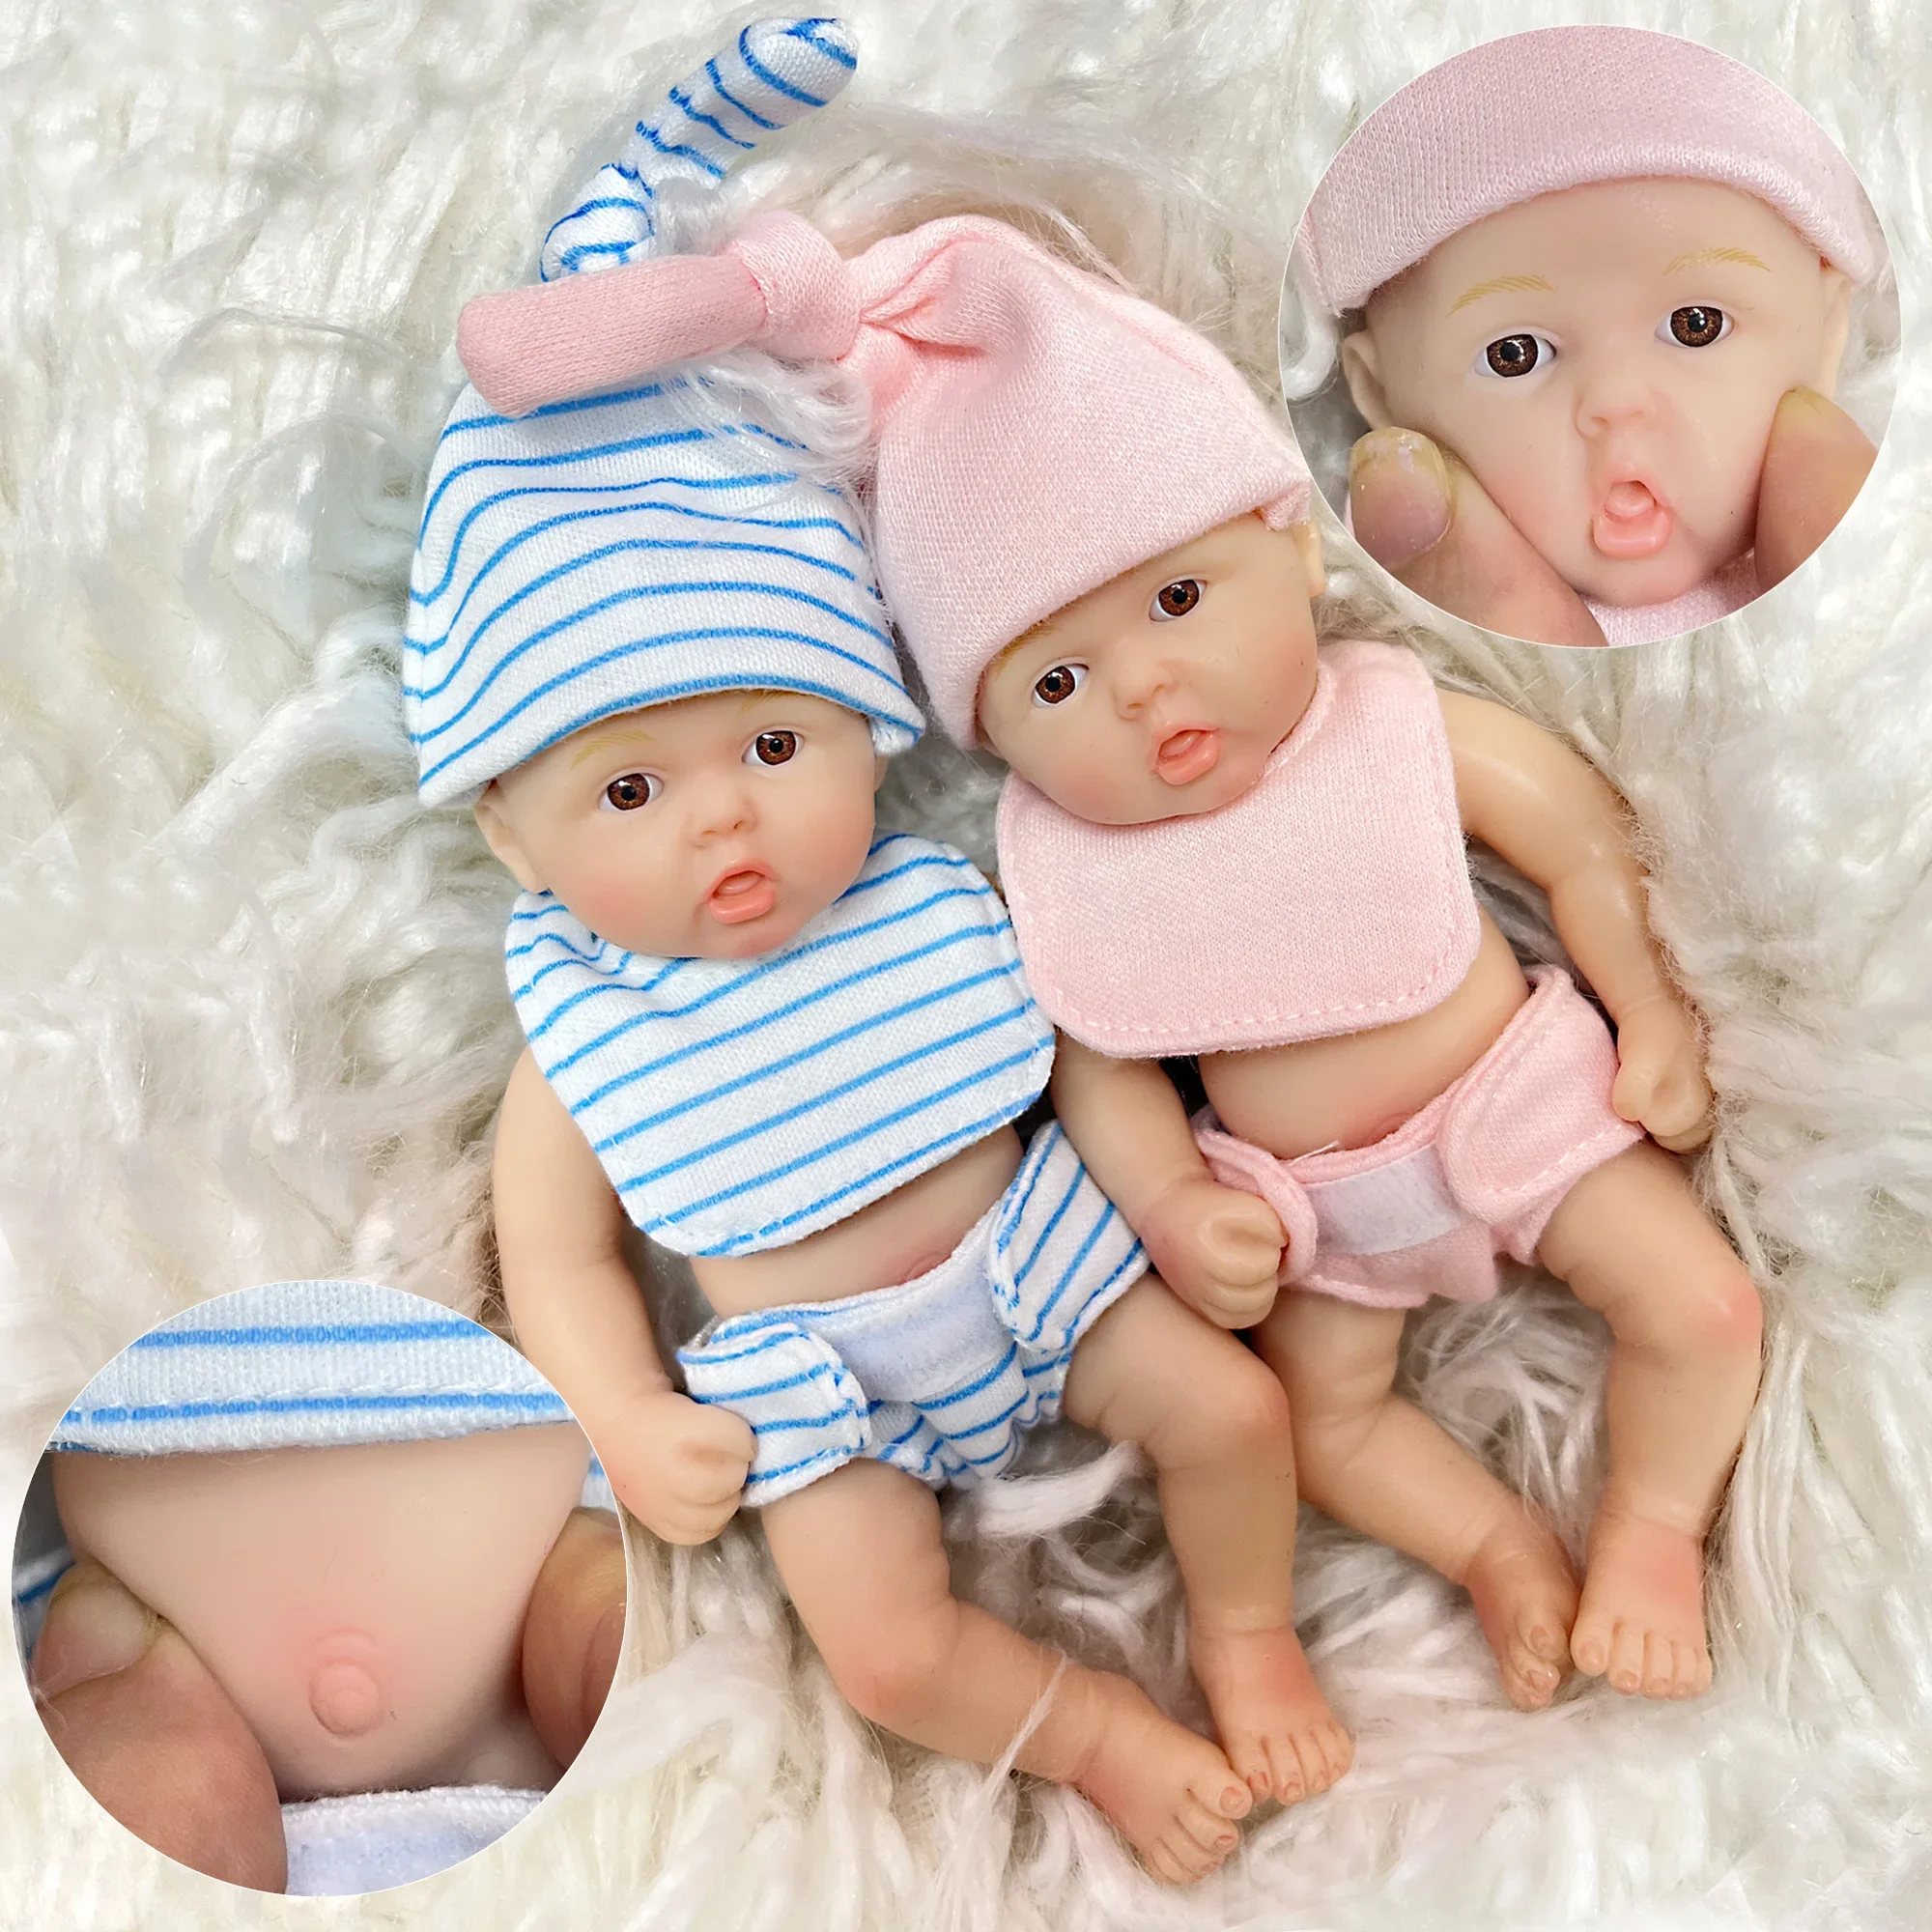 6Inch /15CM Mini Adorable Whole Solid Silicone Reborn Doll Painted Realistic Handmade Reborn Dolls For Kid's Gift Reborn triple wheelie bin shed 210x75x121 cm painted solid pinewood